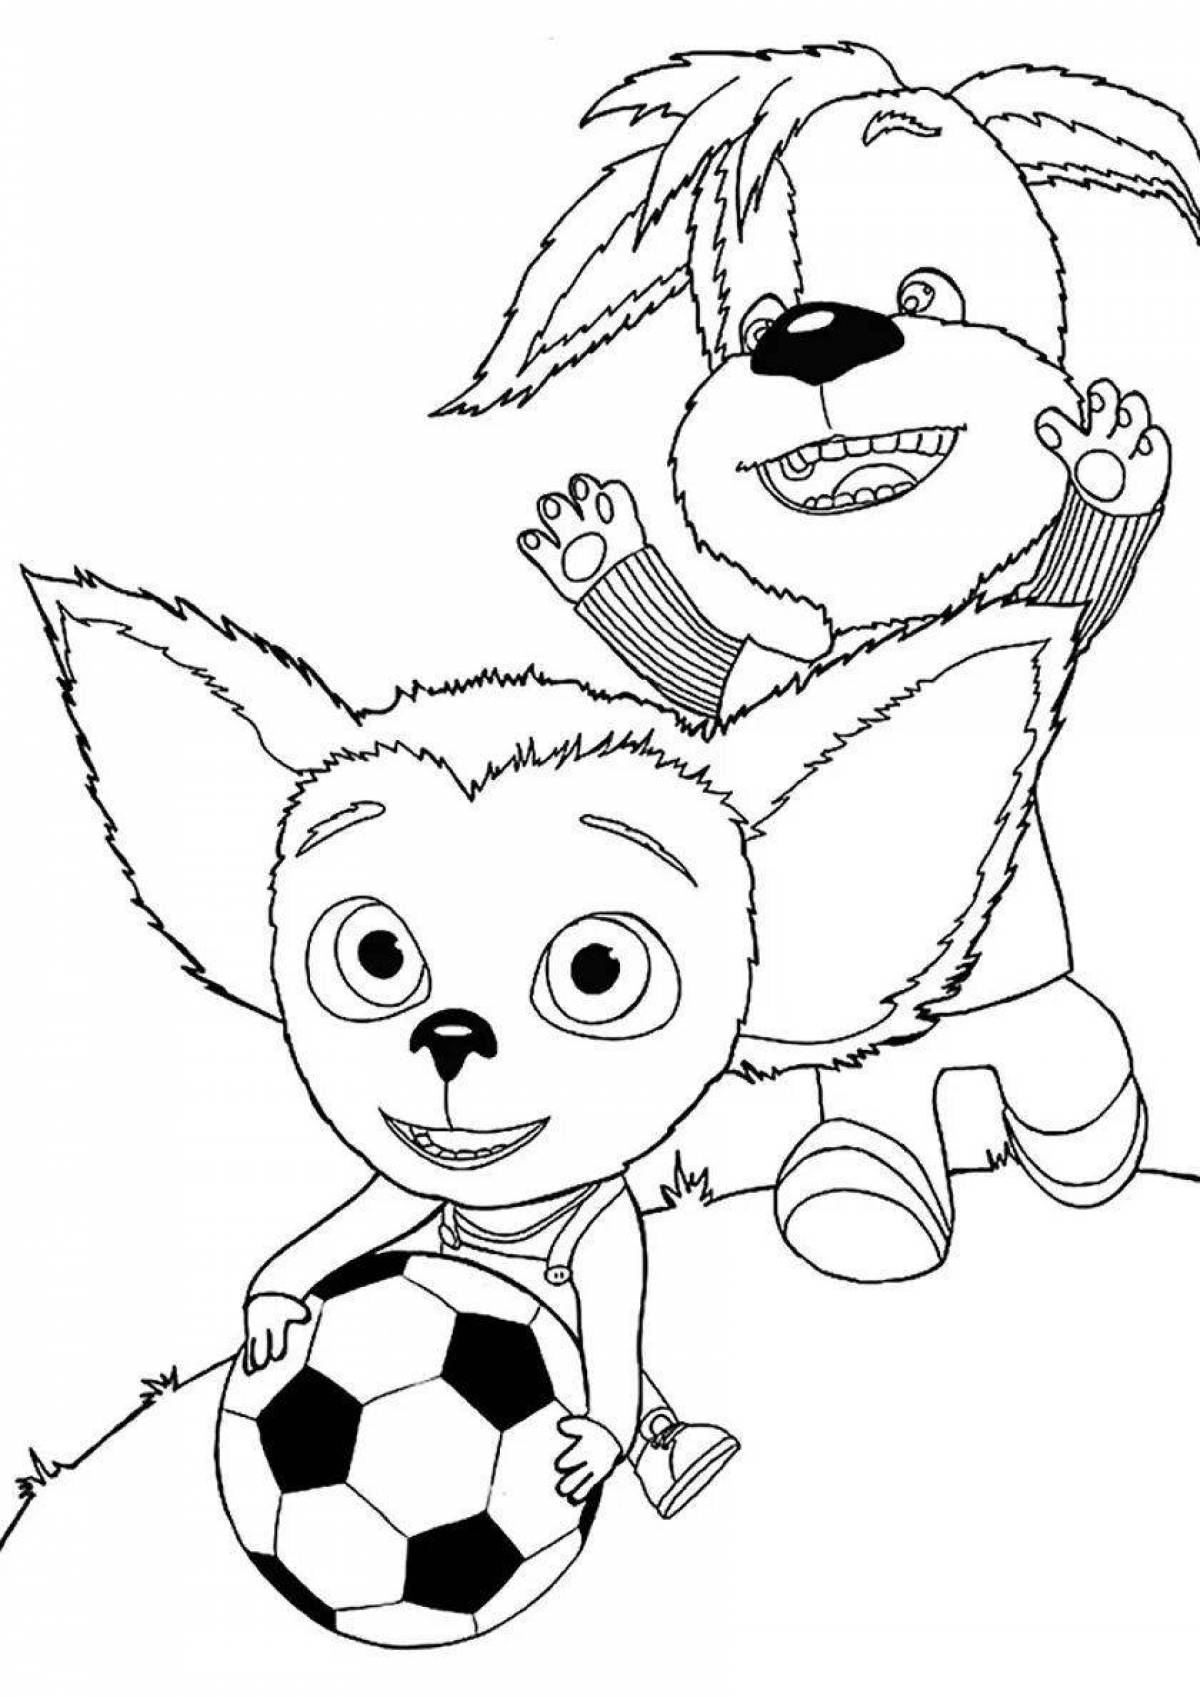 Fancy barboskins all coloring page